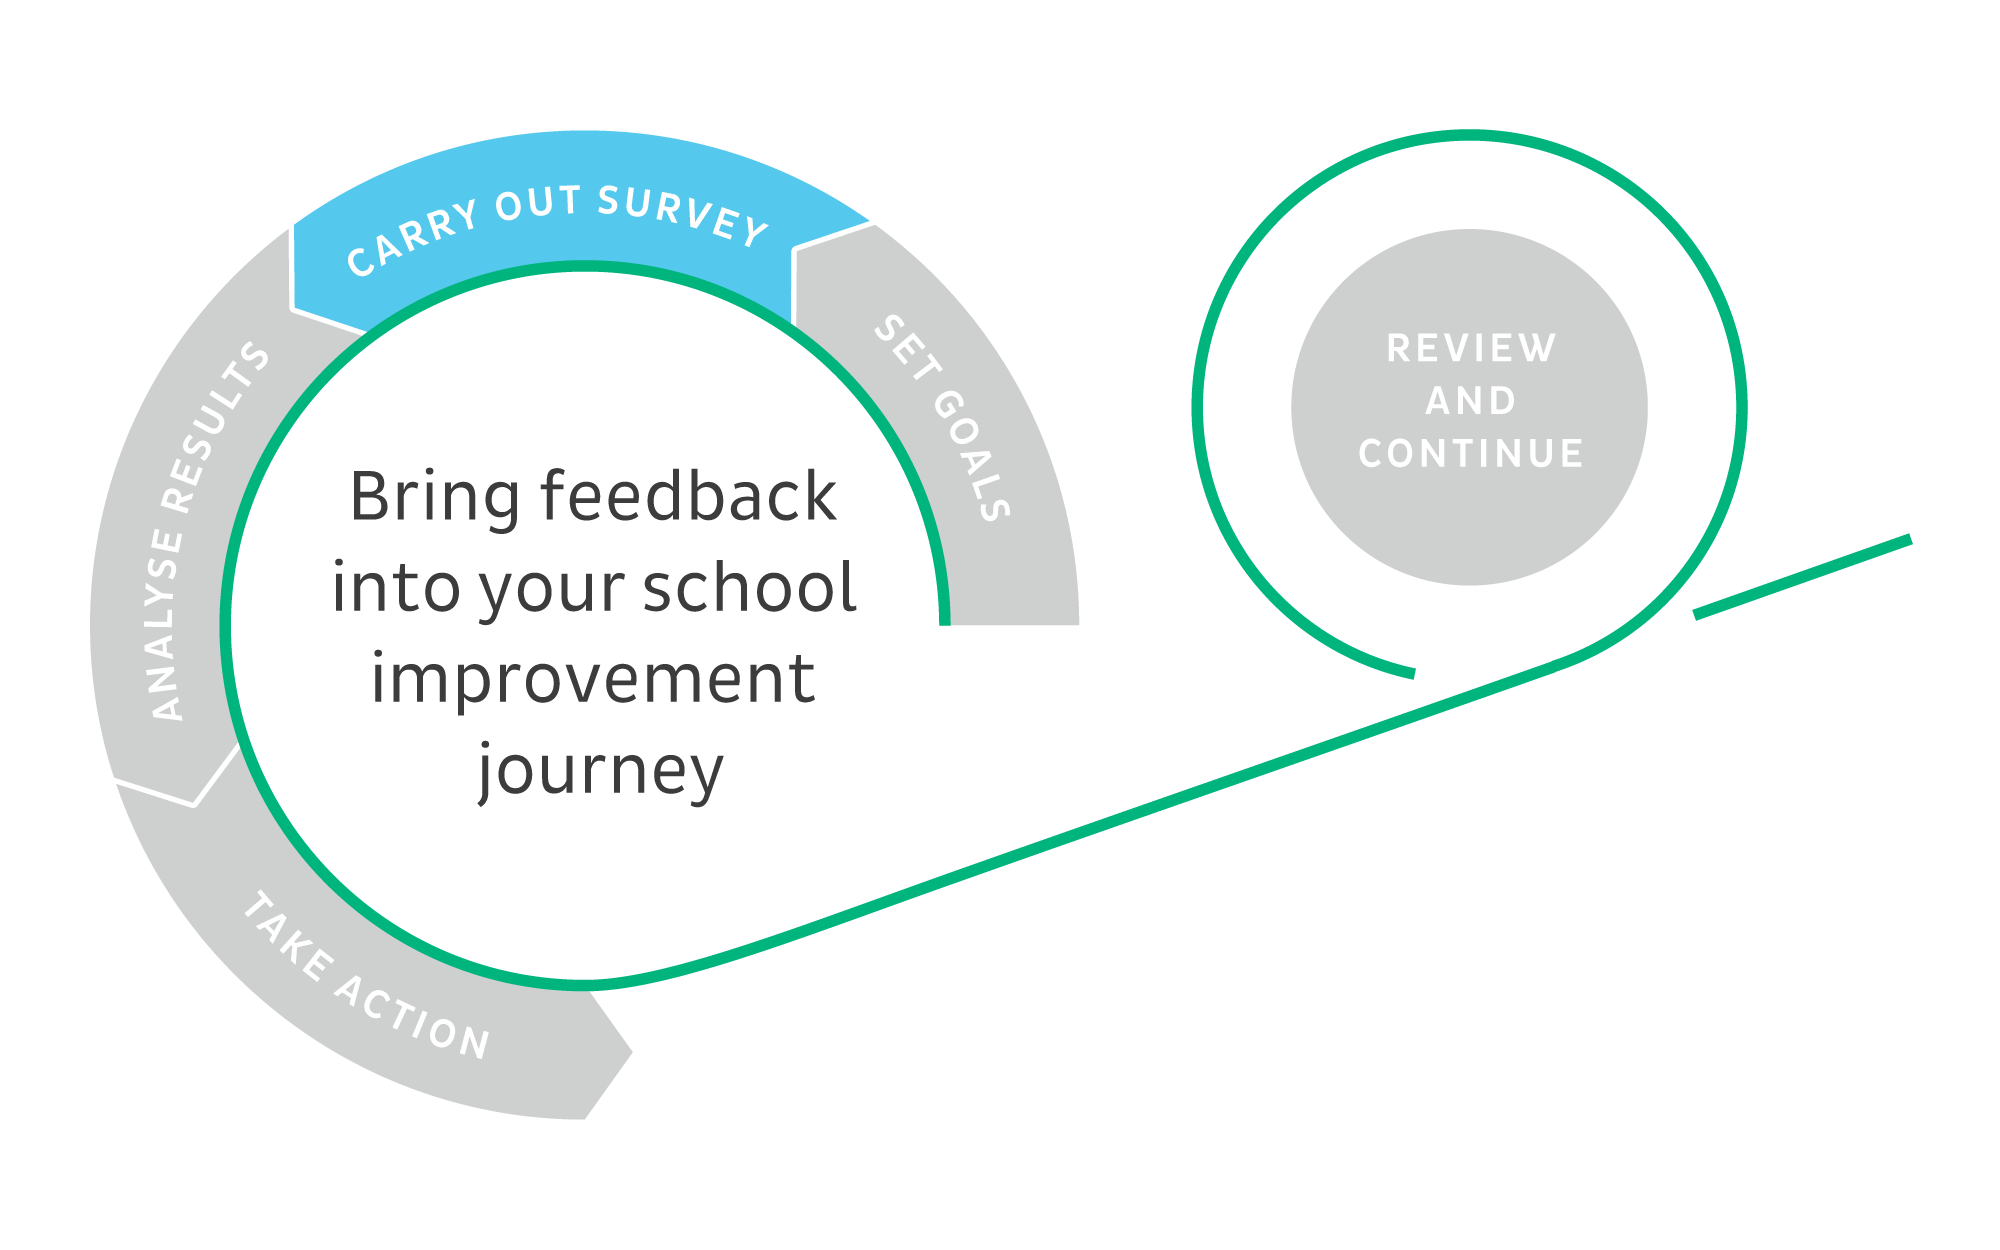 Cycle-circle visualisation_bring feedback into your school improvement journey (carry out survey)